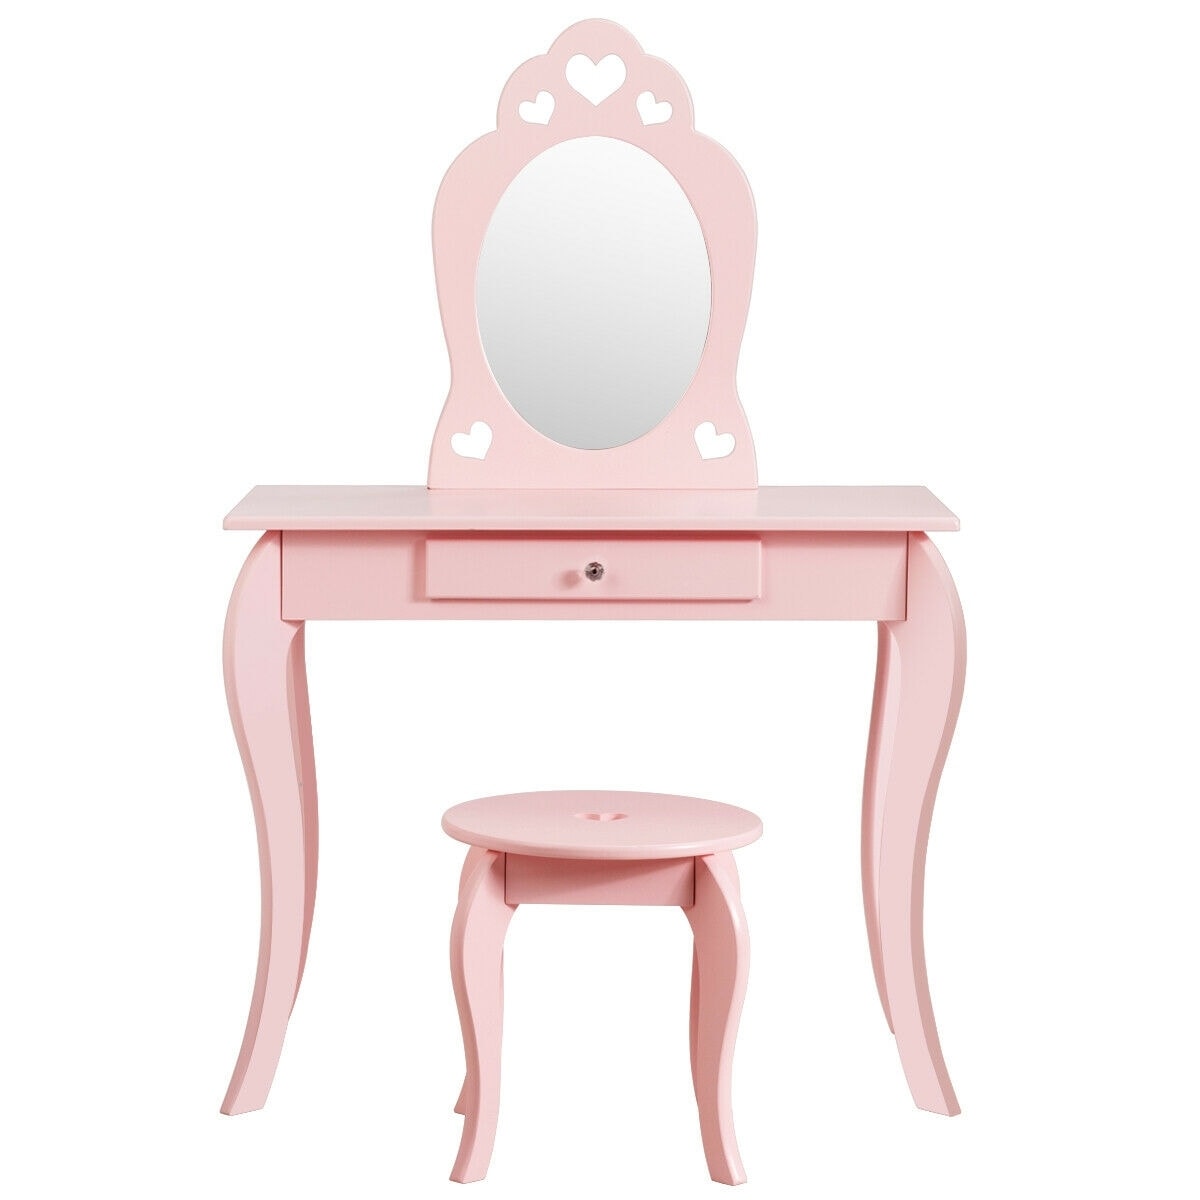 Pretend Beauty Play Vanity Set for Girls Makeup Dressing Table with Stool Kids Princess Vanity Table and Chair Set with Two 180/° Foldable Mirrors